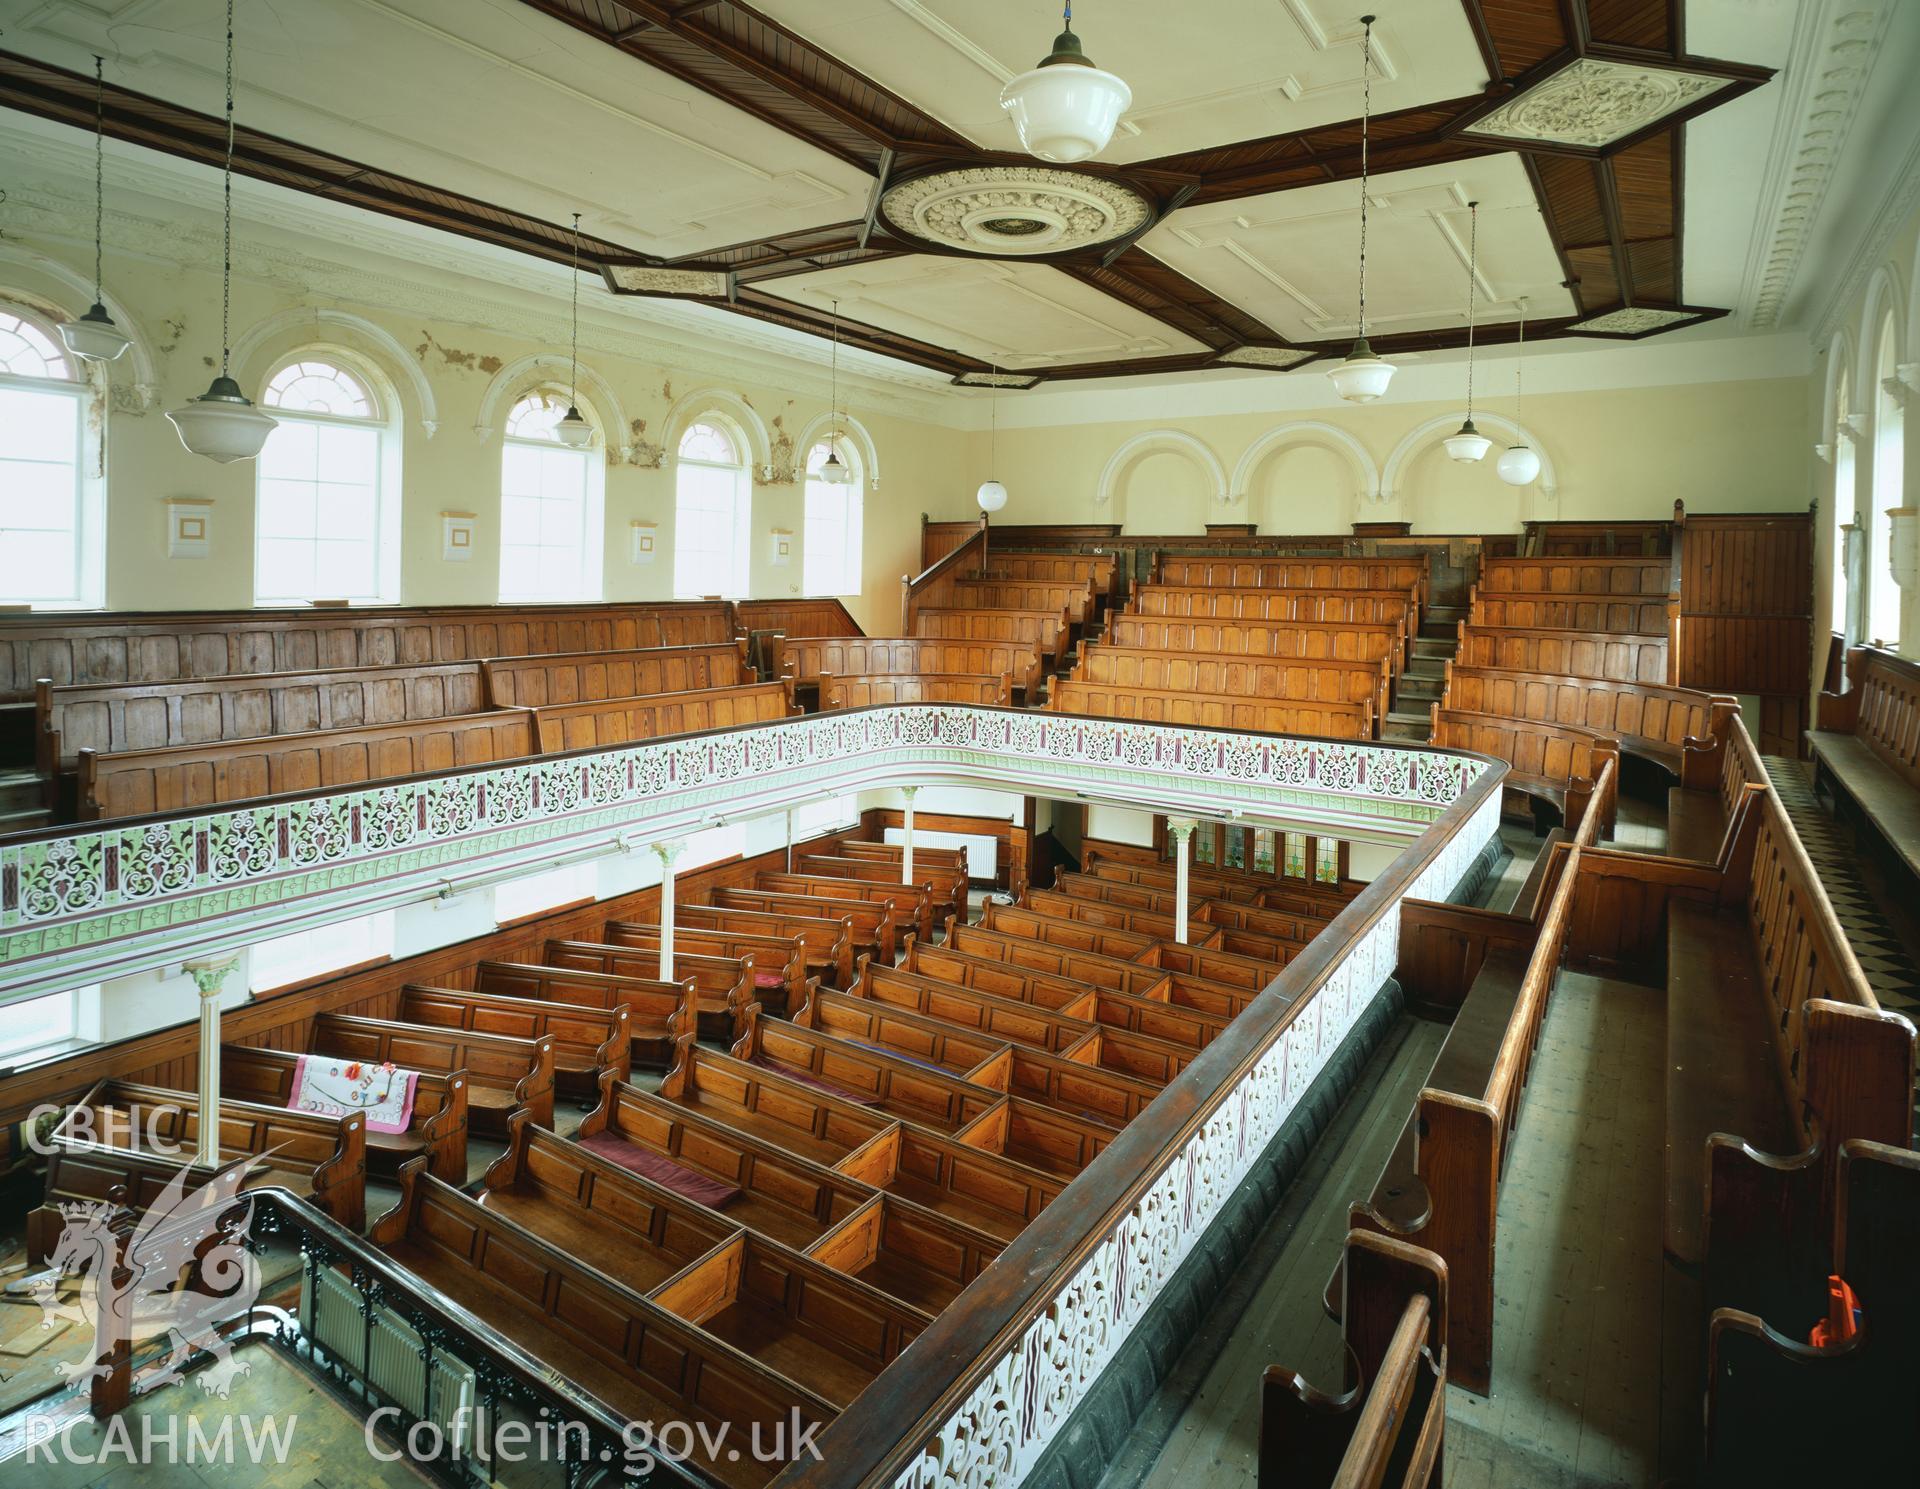 RCAHMW colour transparency showing an interior view of Hope English Baptist Church, Gelli.